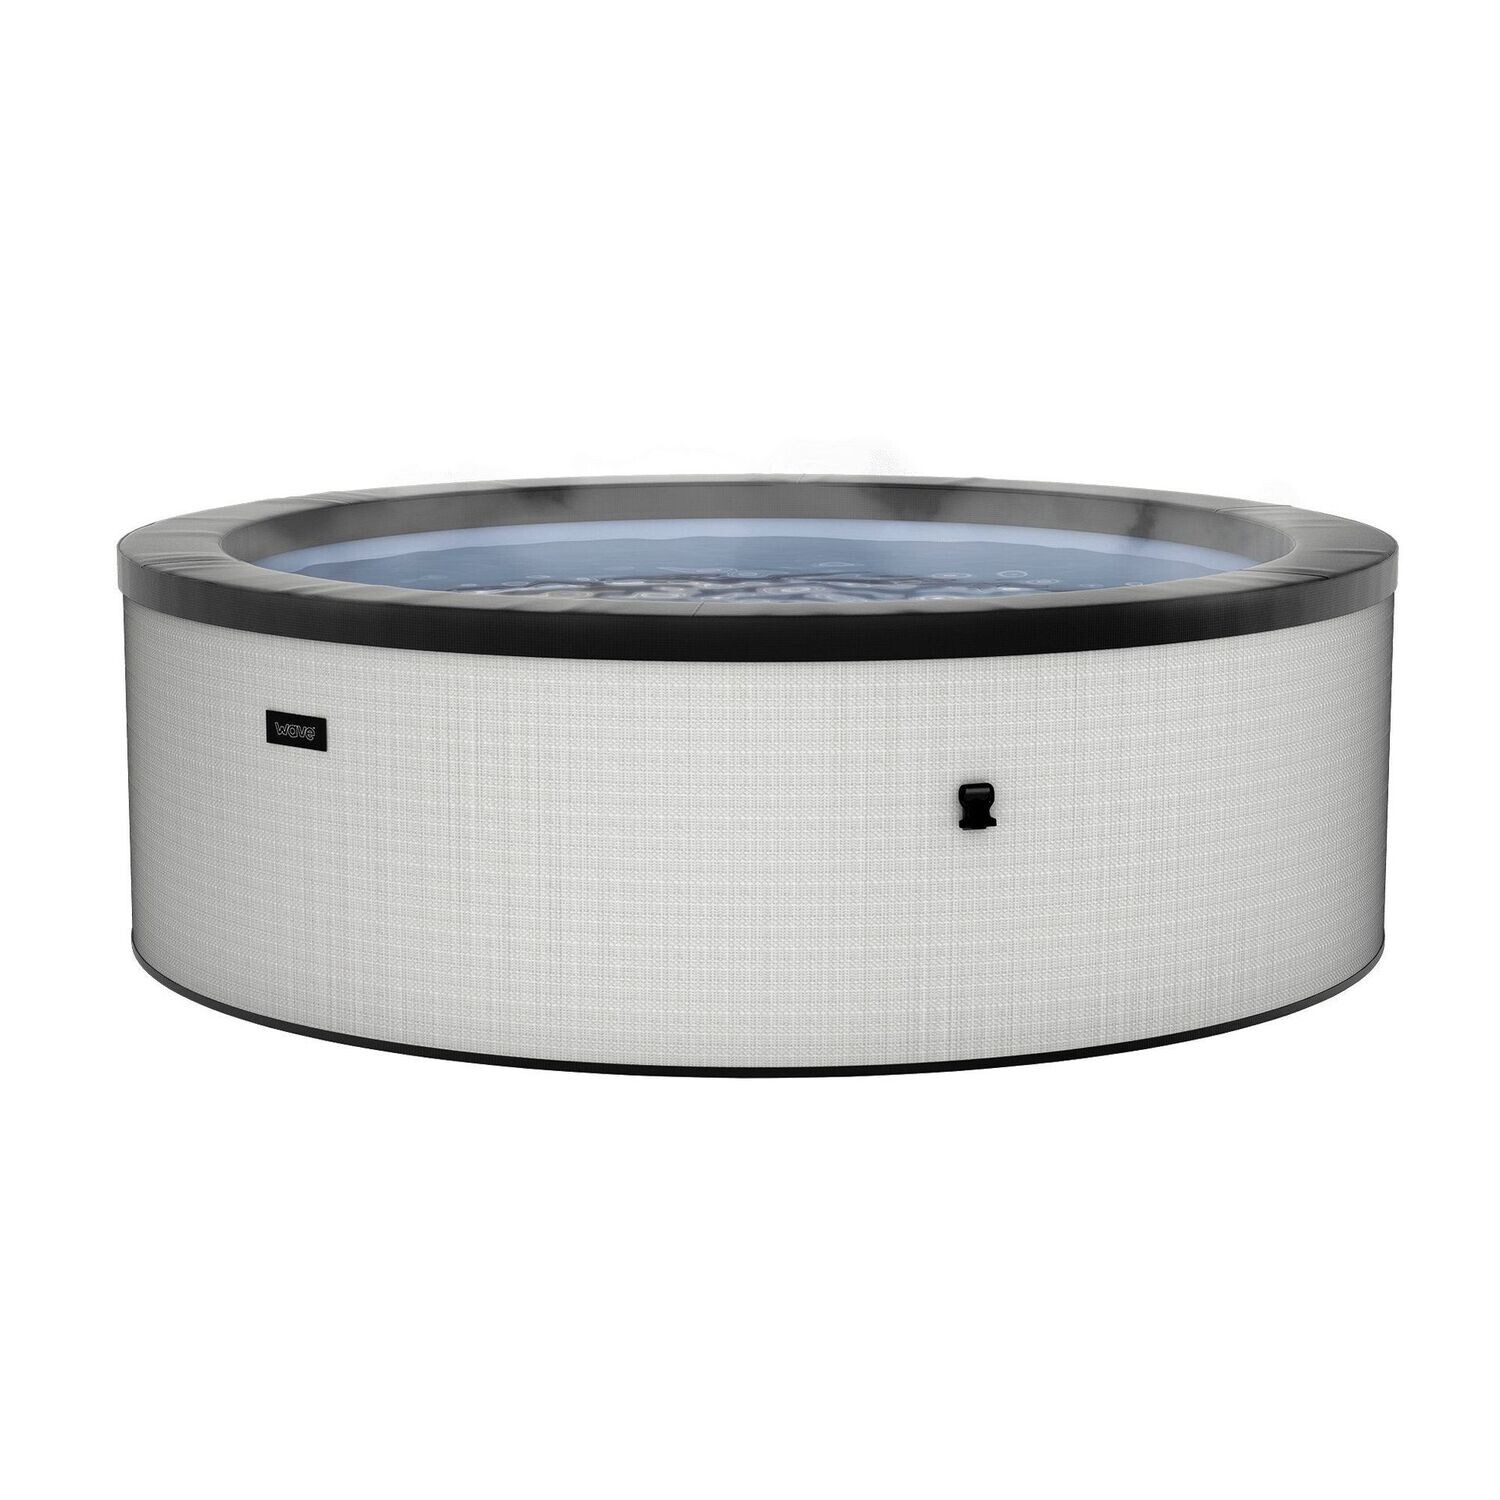 Tahoe v2 | 4 Person Eco Foam Hot Tub | Integrated Heater | Graphite Grey